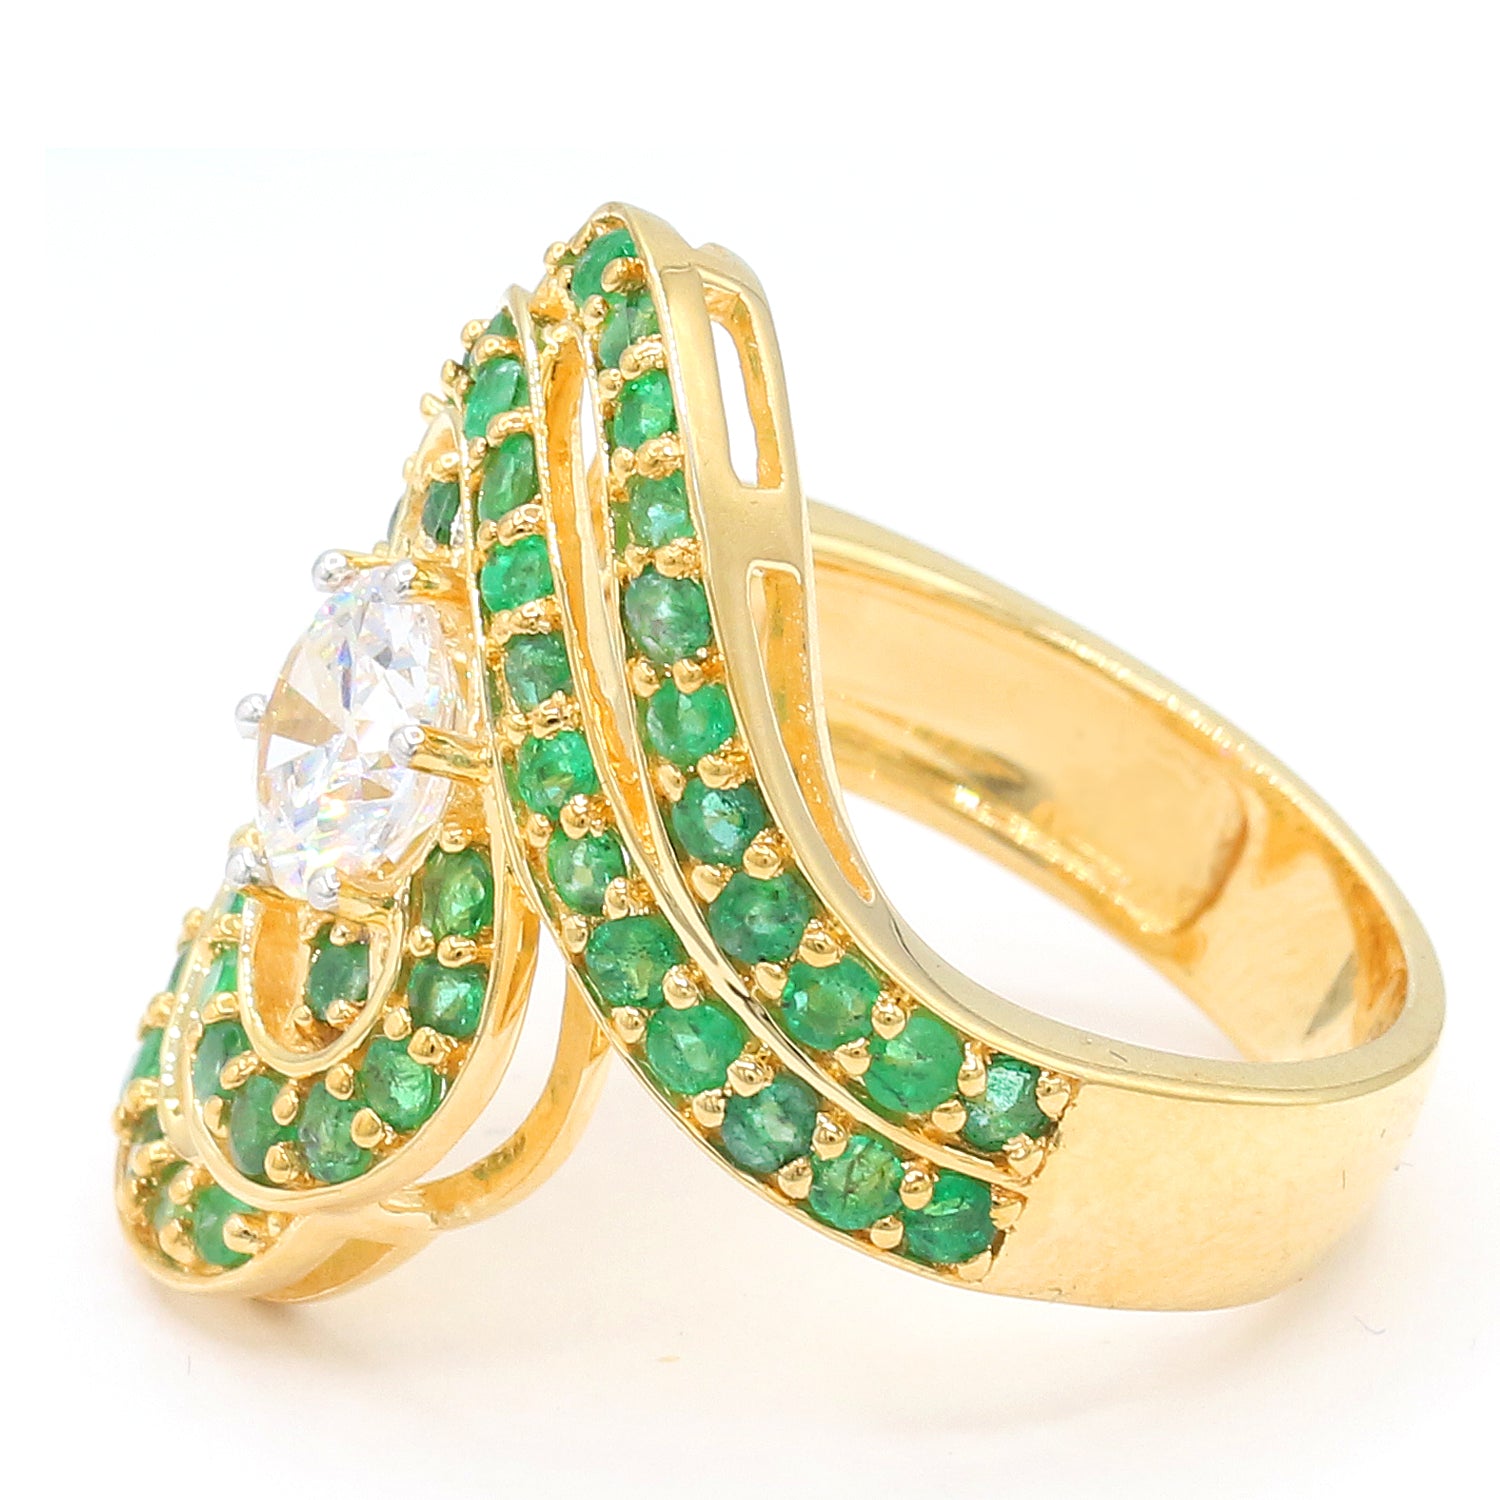 Limited Edition Gems en Vogue Luxe, One-of-a-kind IGI Certified Over 1ct Lab Grown Diamond & Emerald Swirl Ring